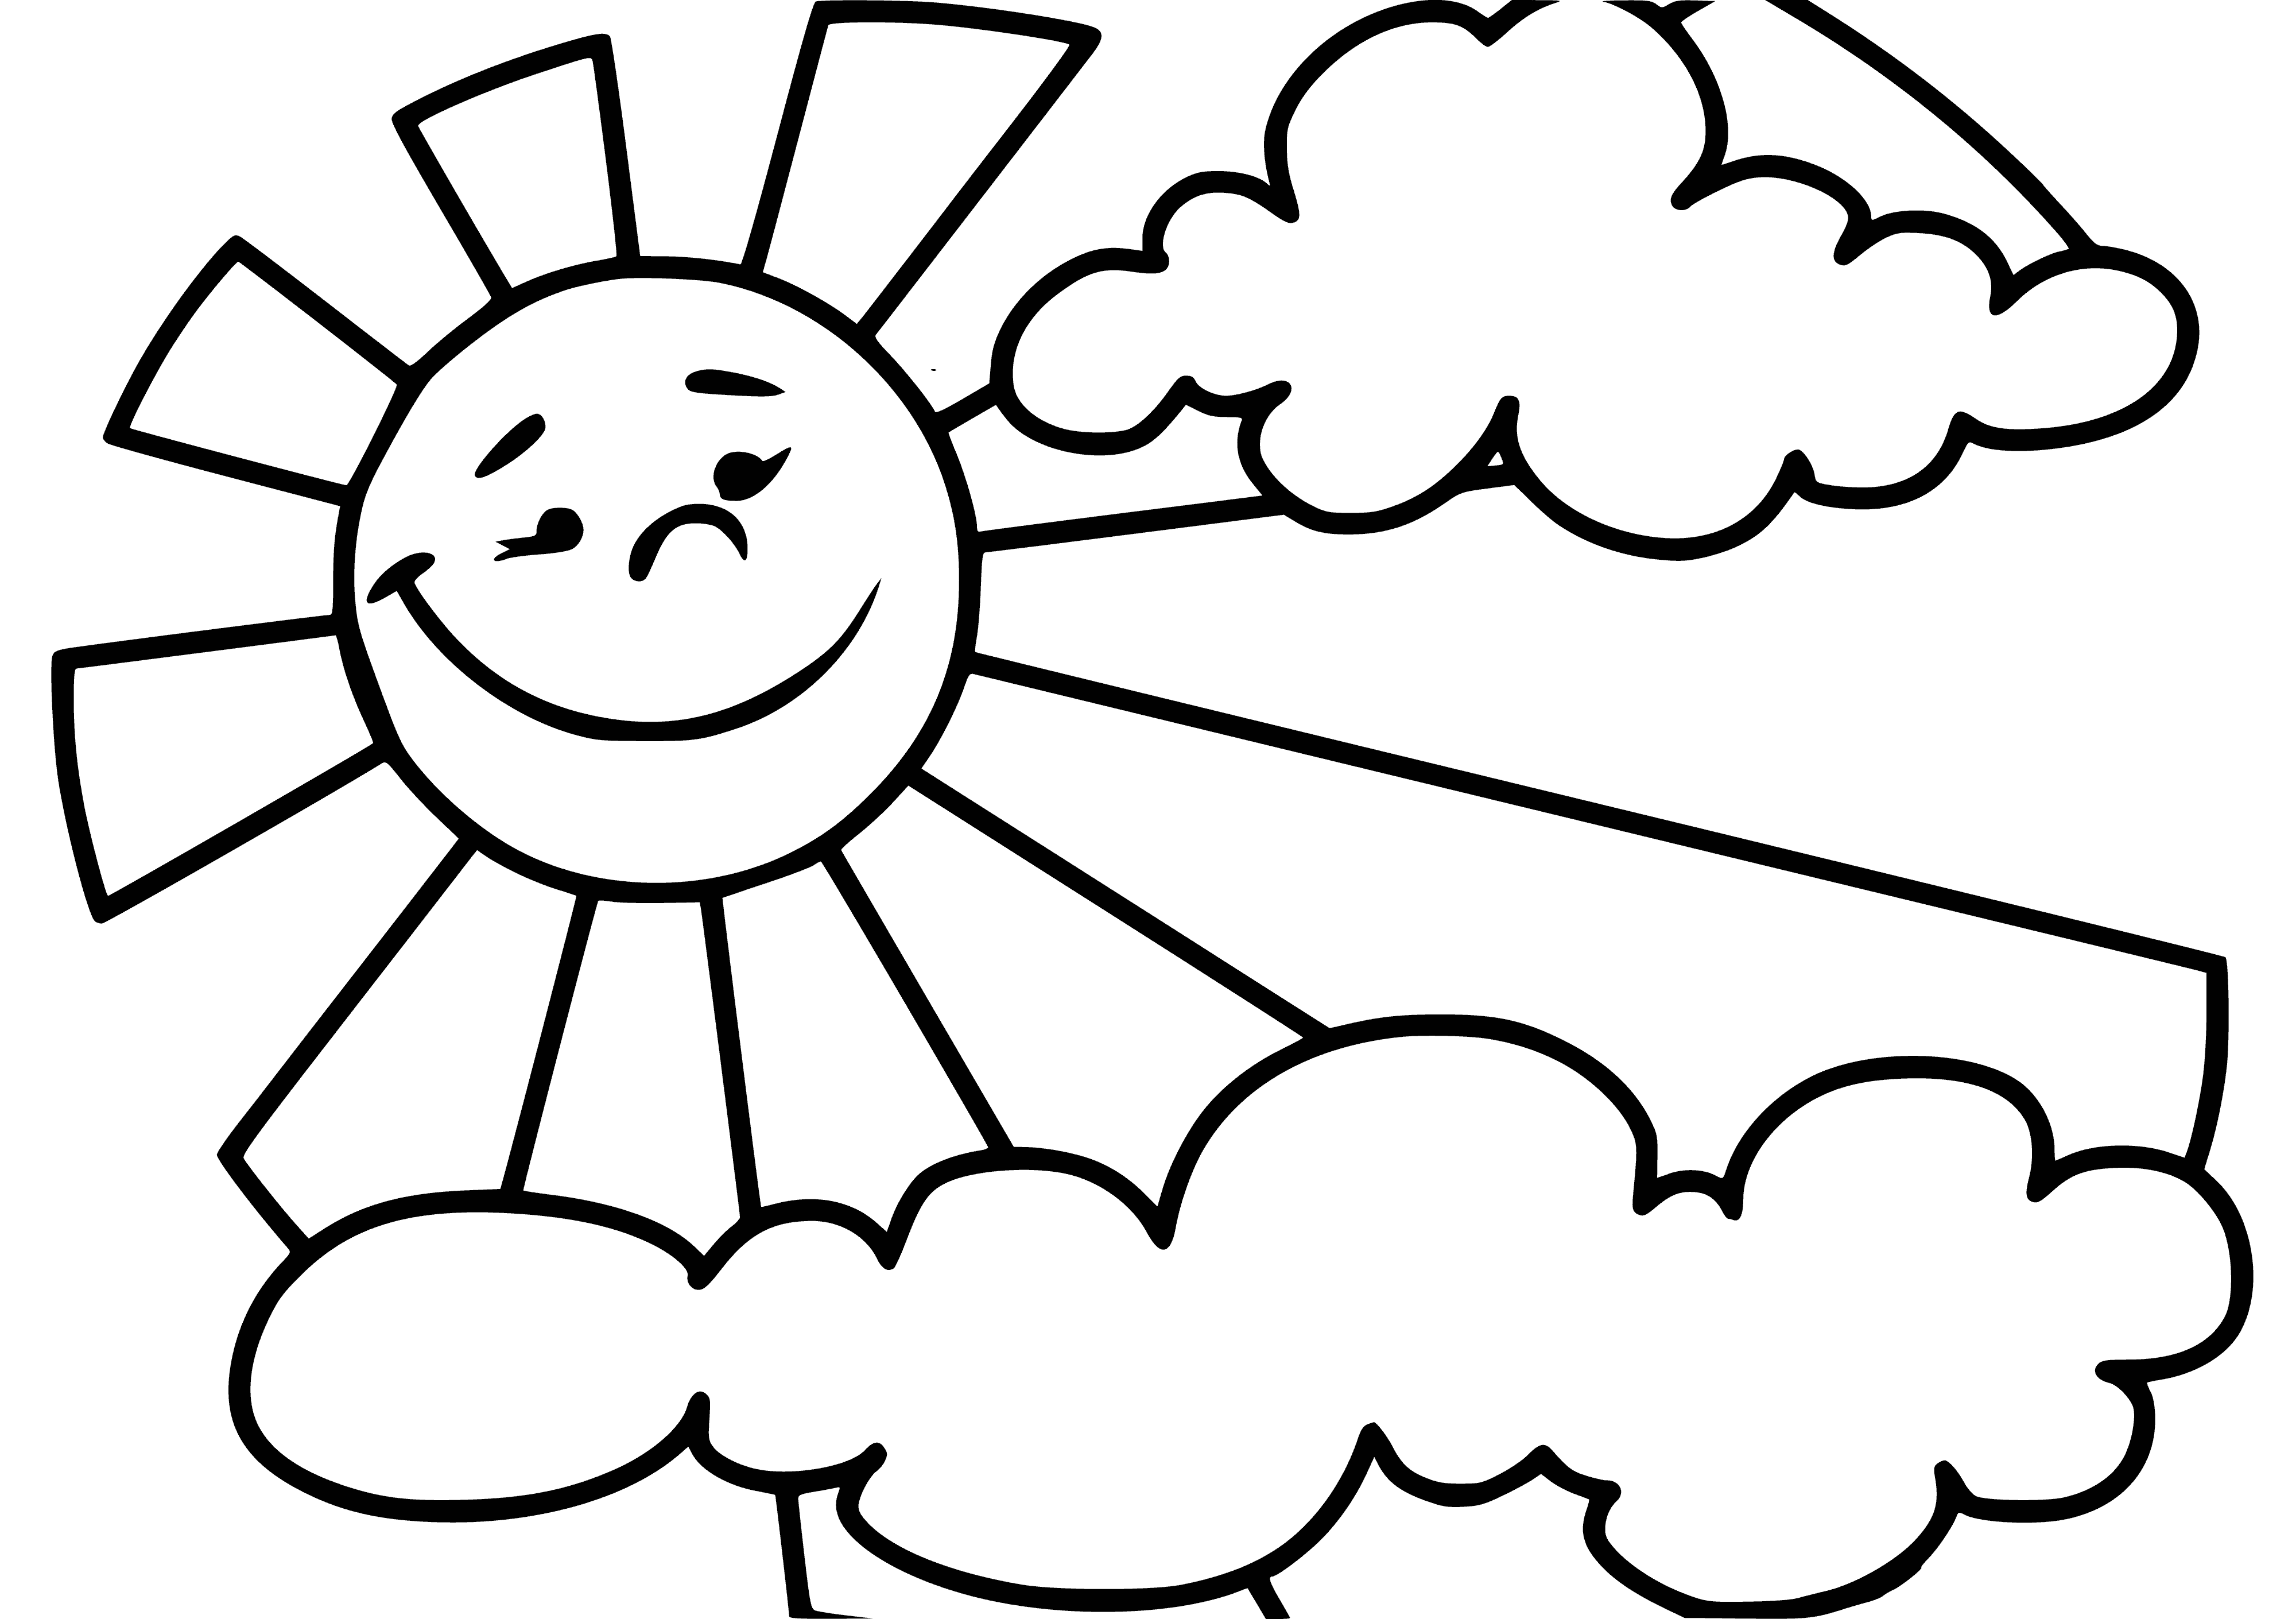 coloring page: Sun shining brightly in a cloudless sky, its yellow hue warming the world. #sun